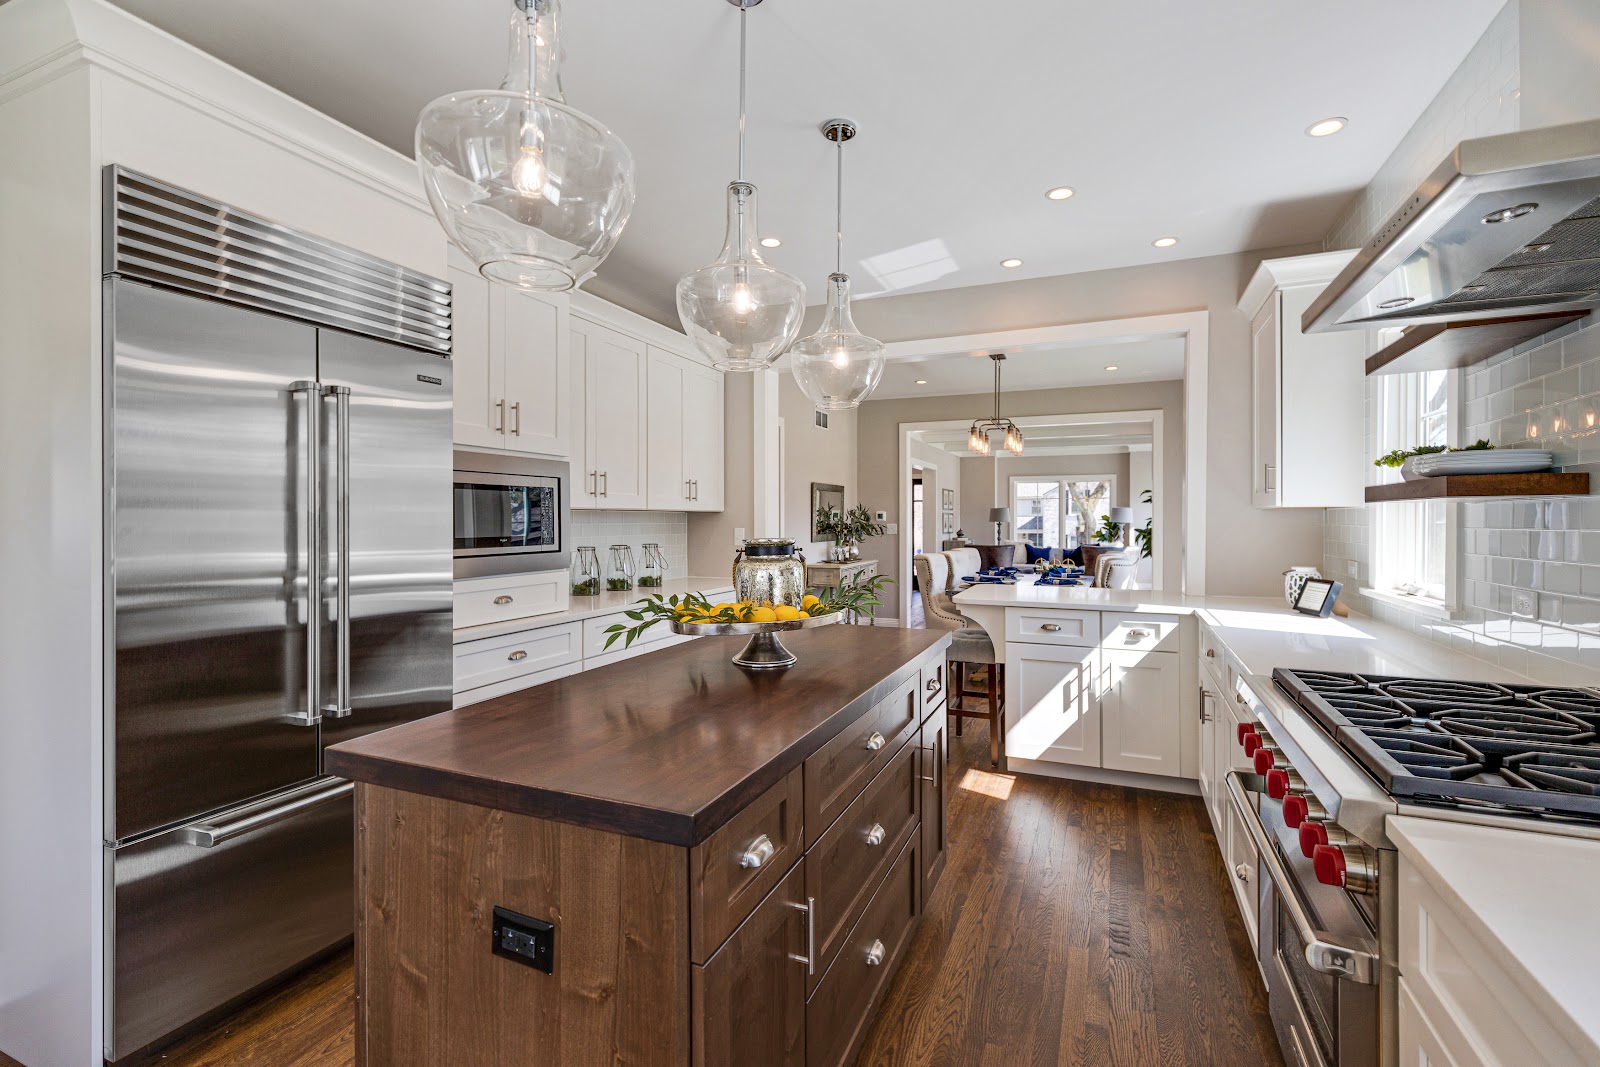 Modern kitchen design with white cabinets and a natural wood finish island from Wood Harbor, a KCMA certified cabinet builder. Featuring quartz countertops and energy star appliances.